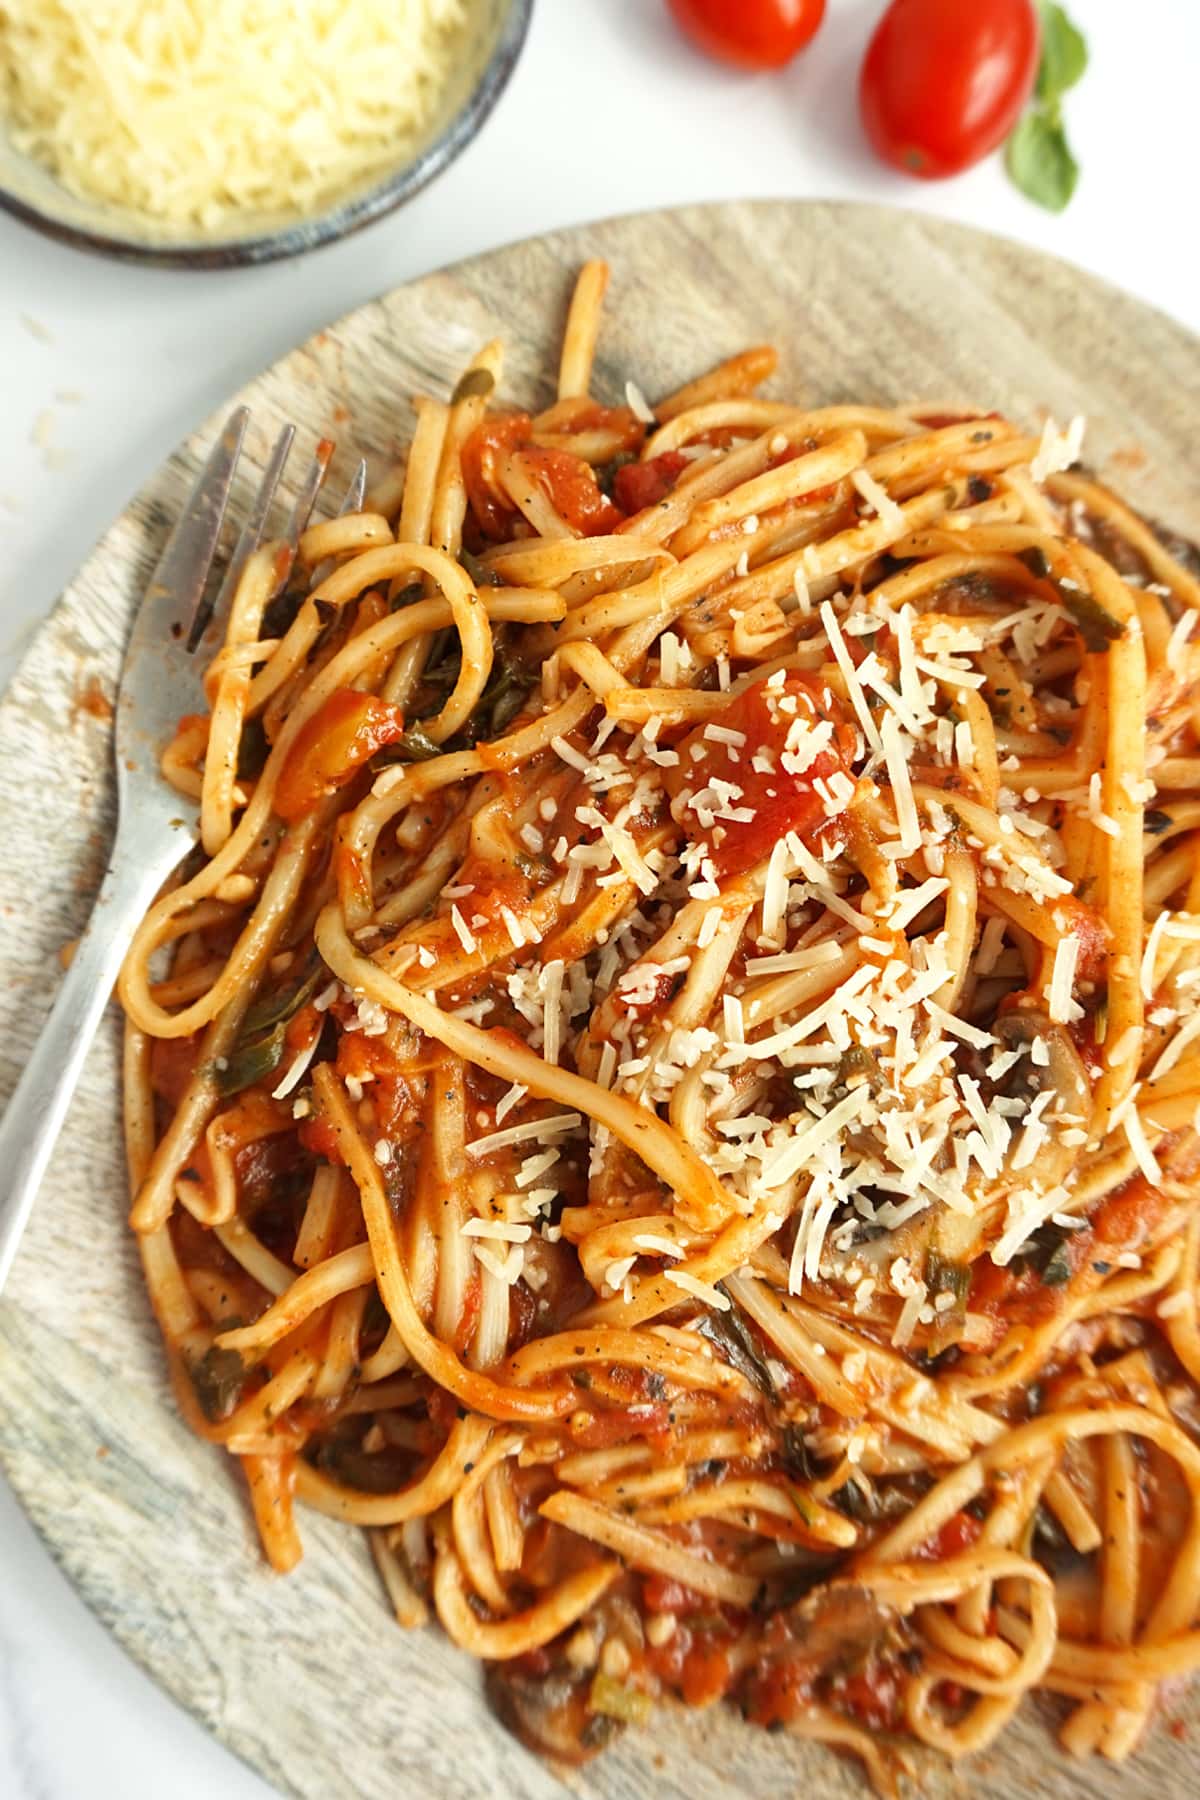 A plate of palmini spaghetti with a fork on the plate